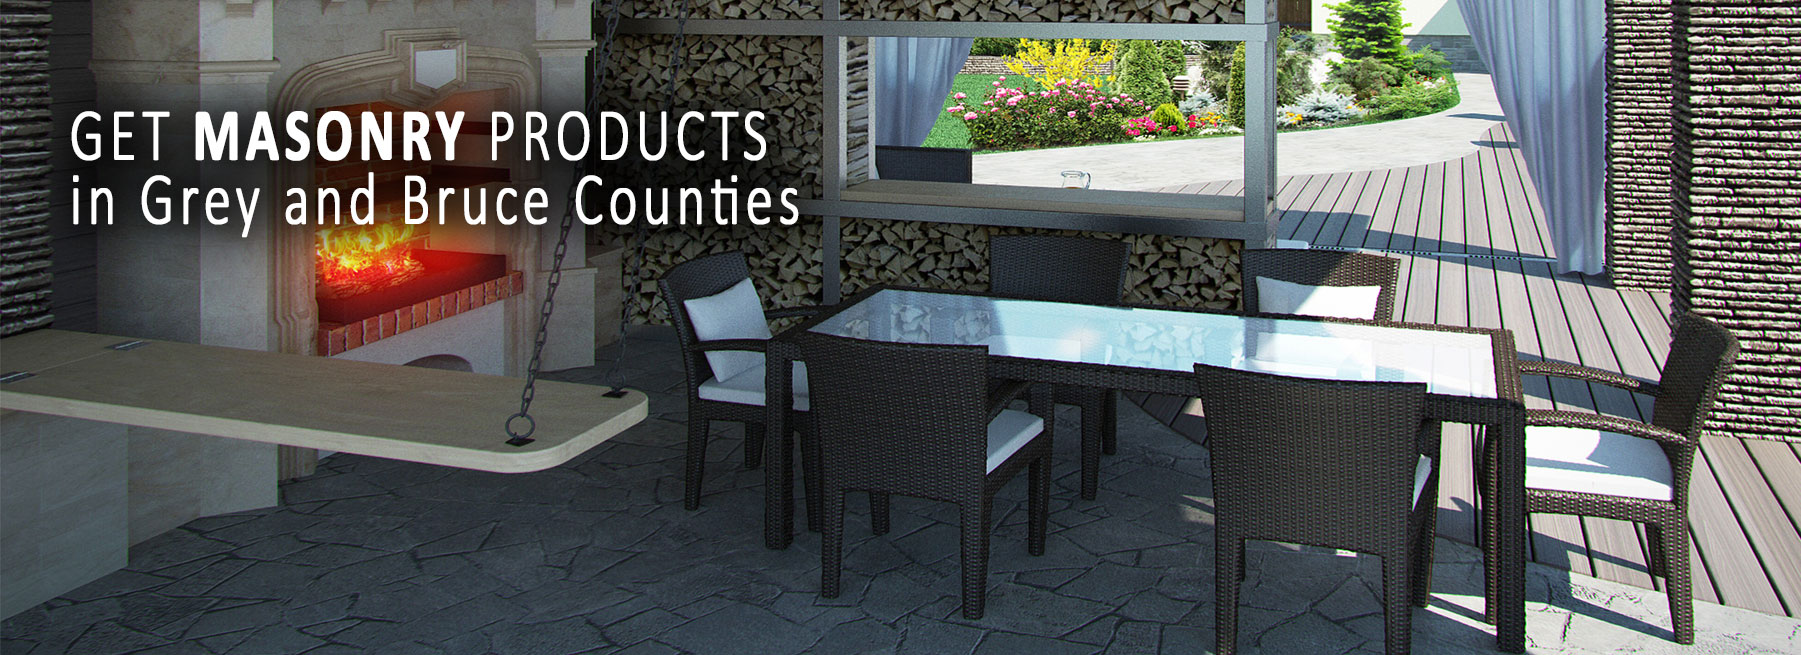 Quality Masonry Products in Grey and Bruce Counties